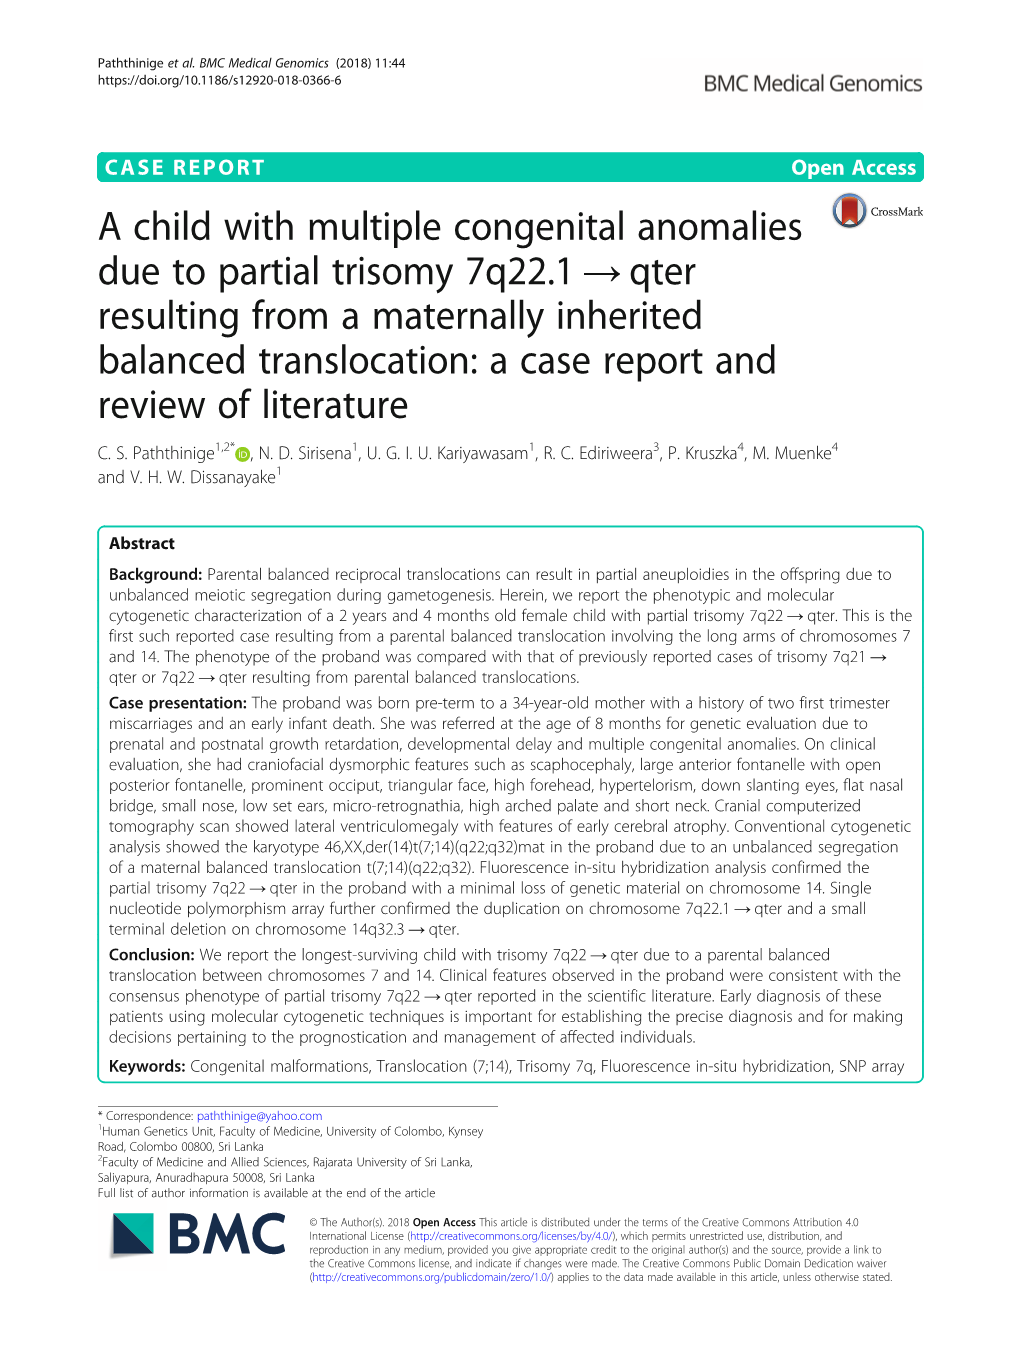 A Child with Multiple Congenital Anomalies Due to Partial Trisomy